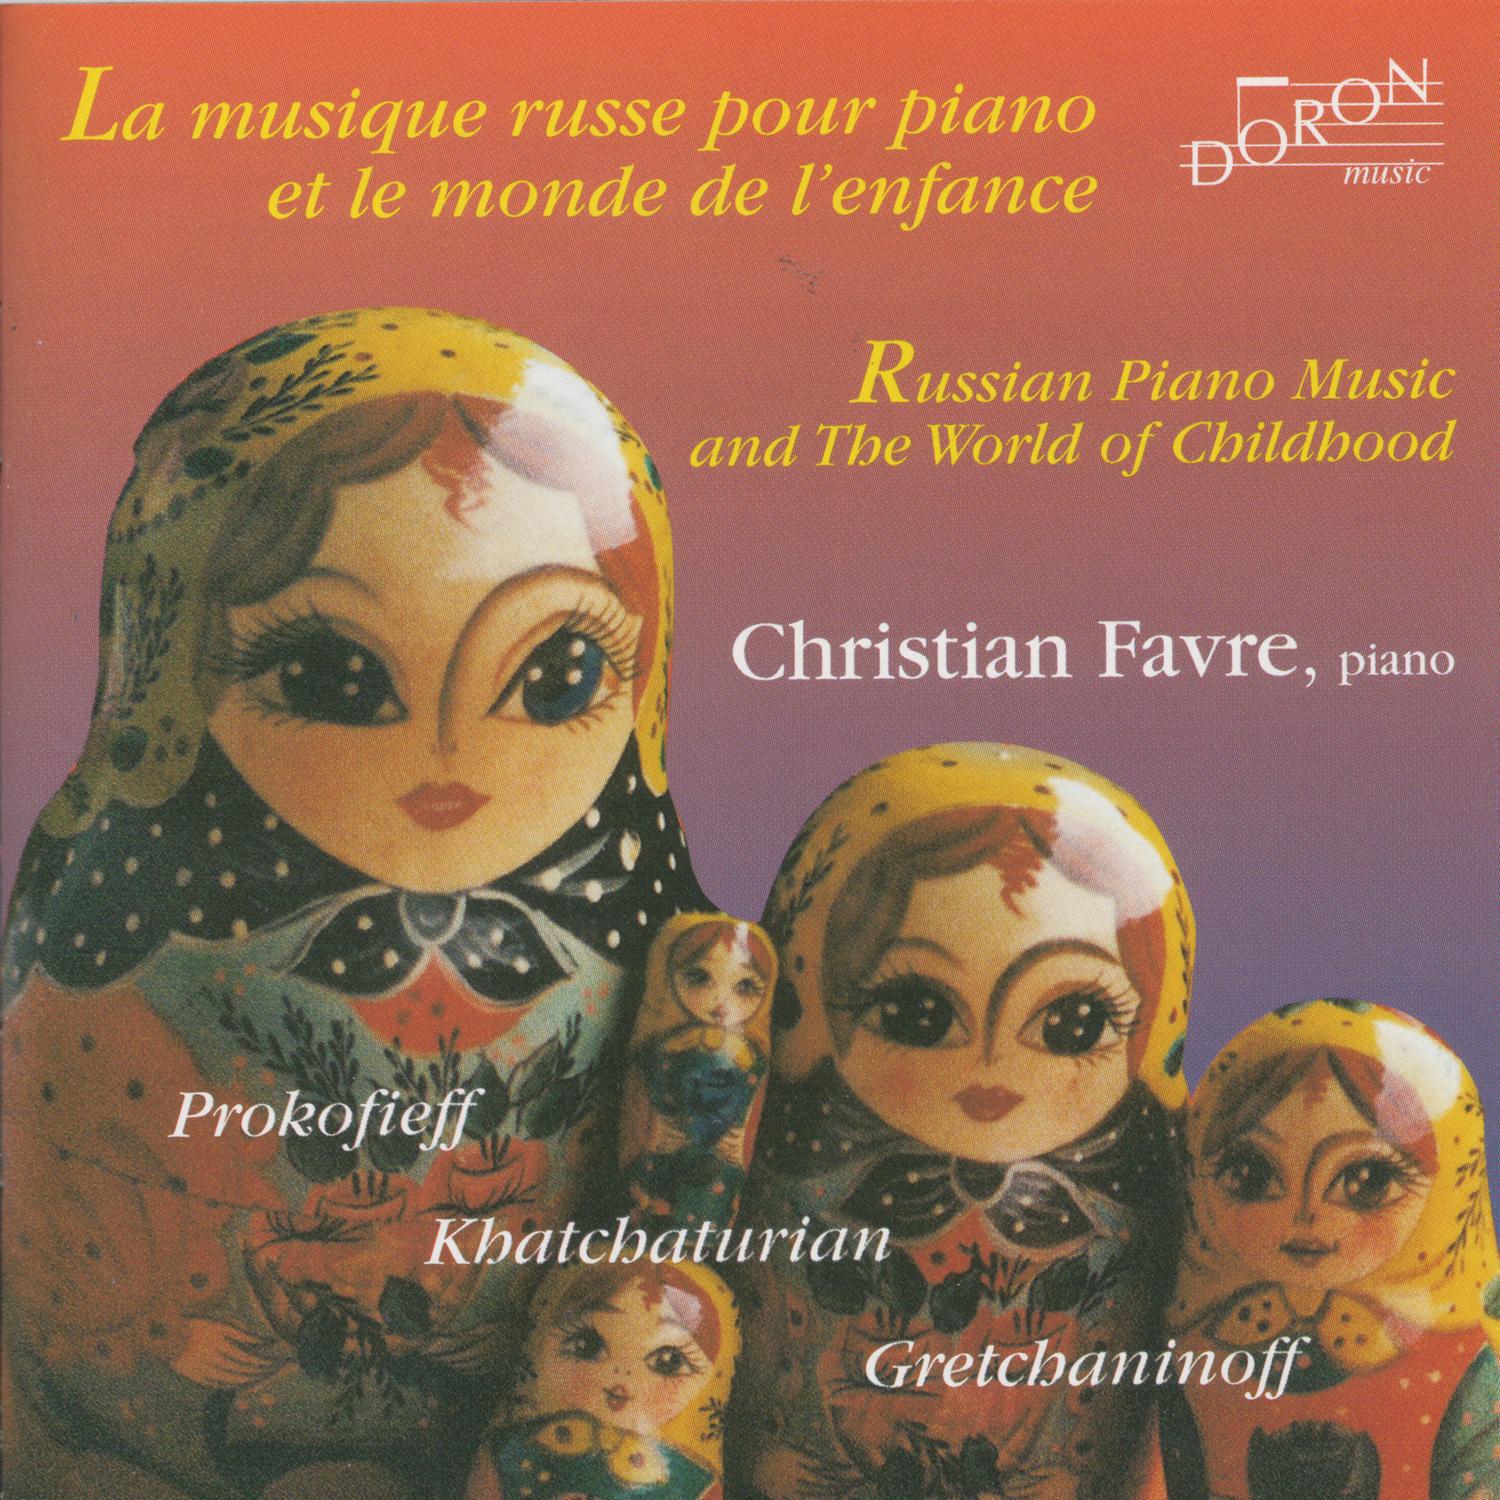 Russian Piano Music and The World of Childhood